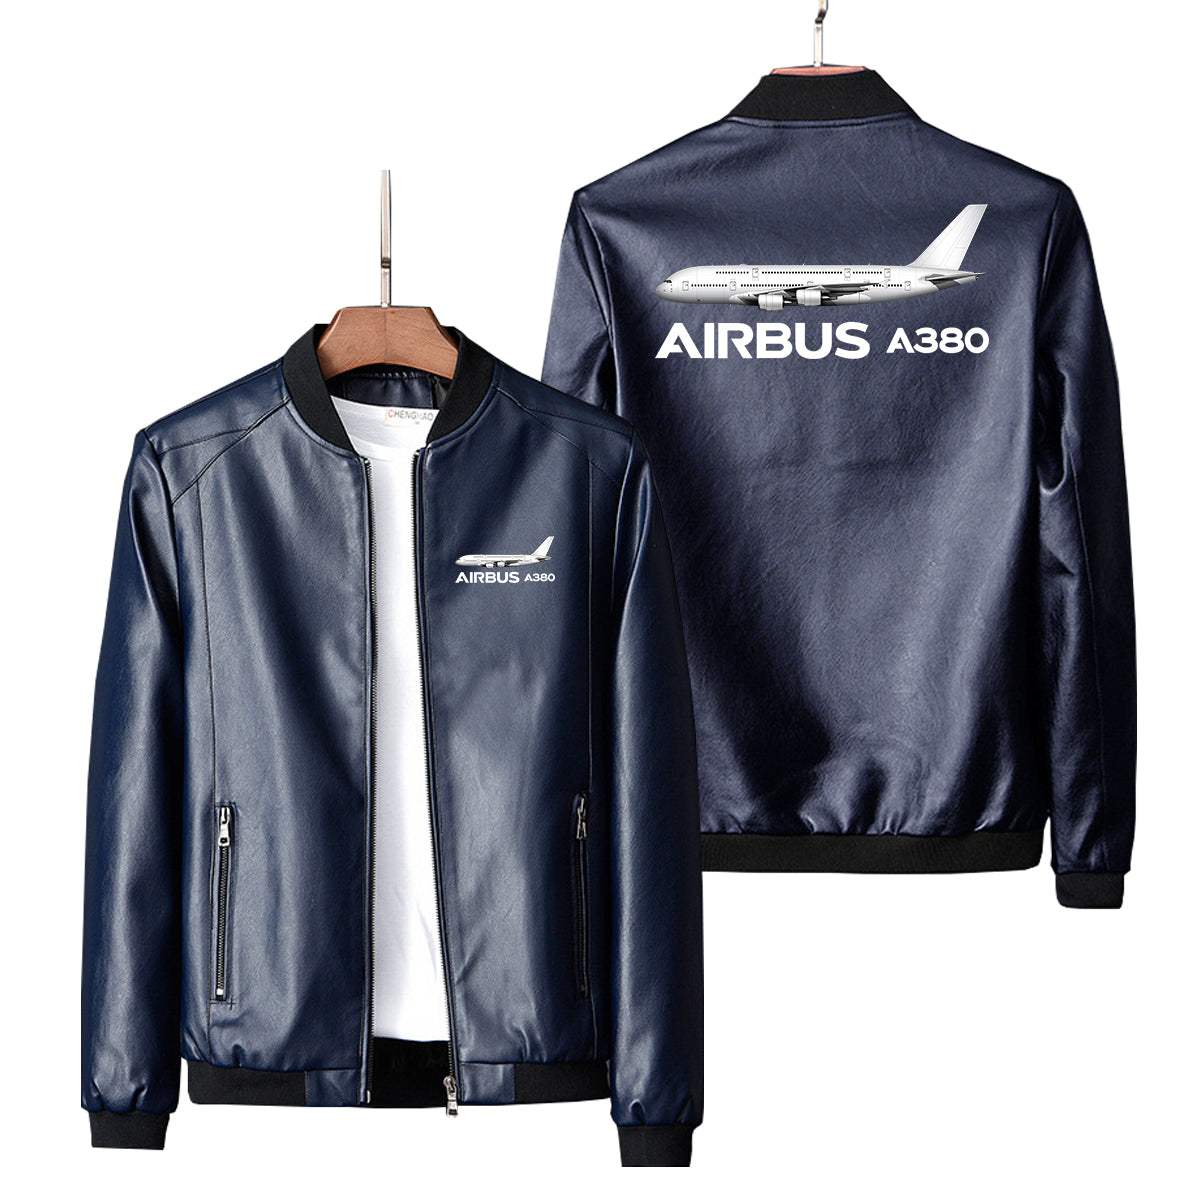 The Airbus A380 Designed PU Leather Jackets